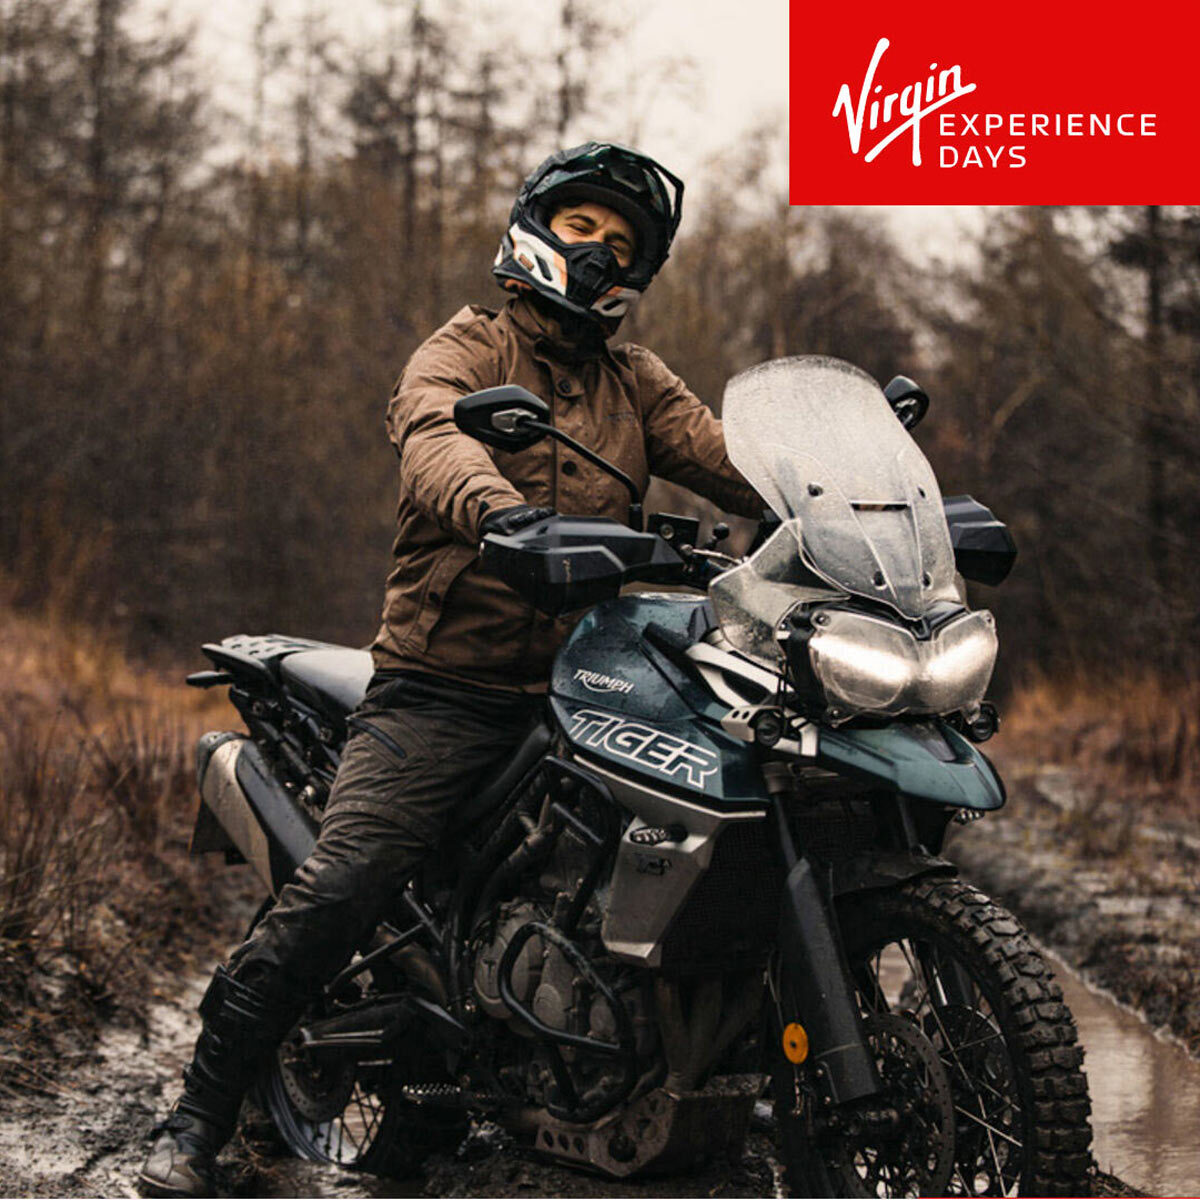 Buy Virgin Experience Full Day Scrambler Motorcycle Experience Image2 at Costco.co.uk